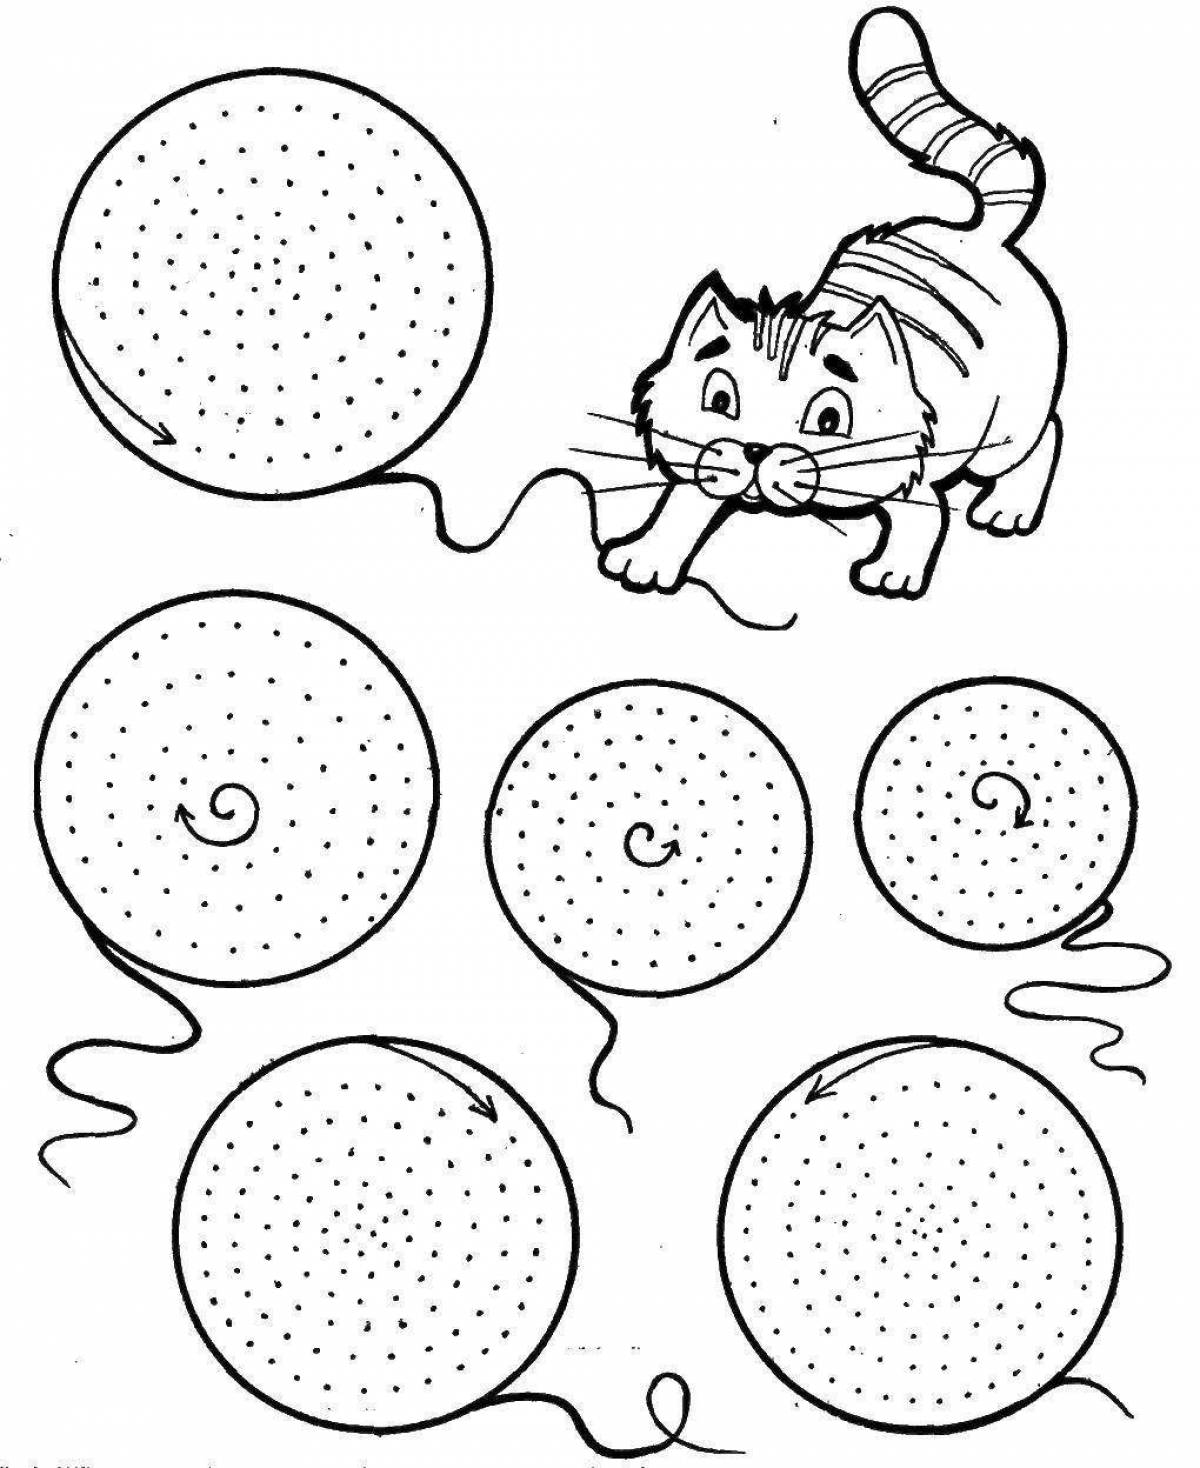 Stimulating coloring book for developing fine motor skills